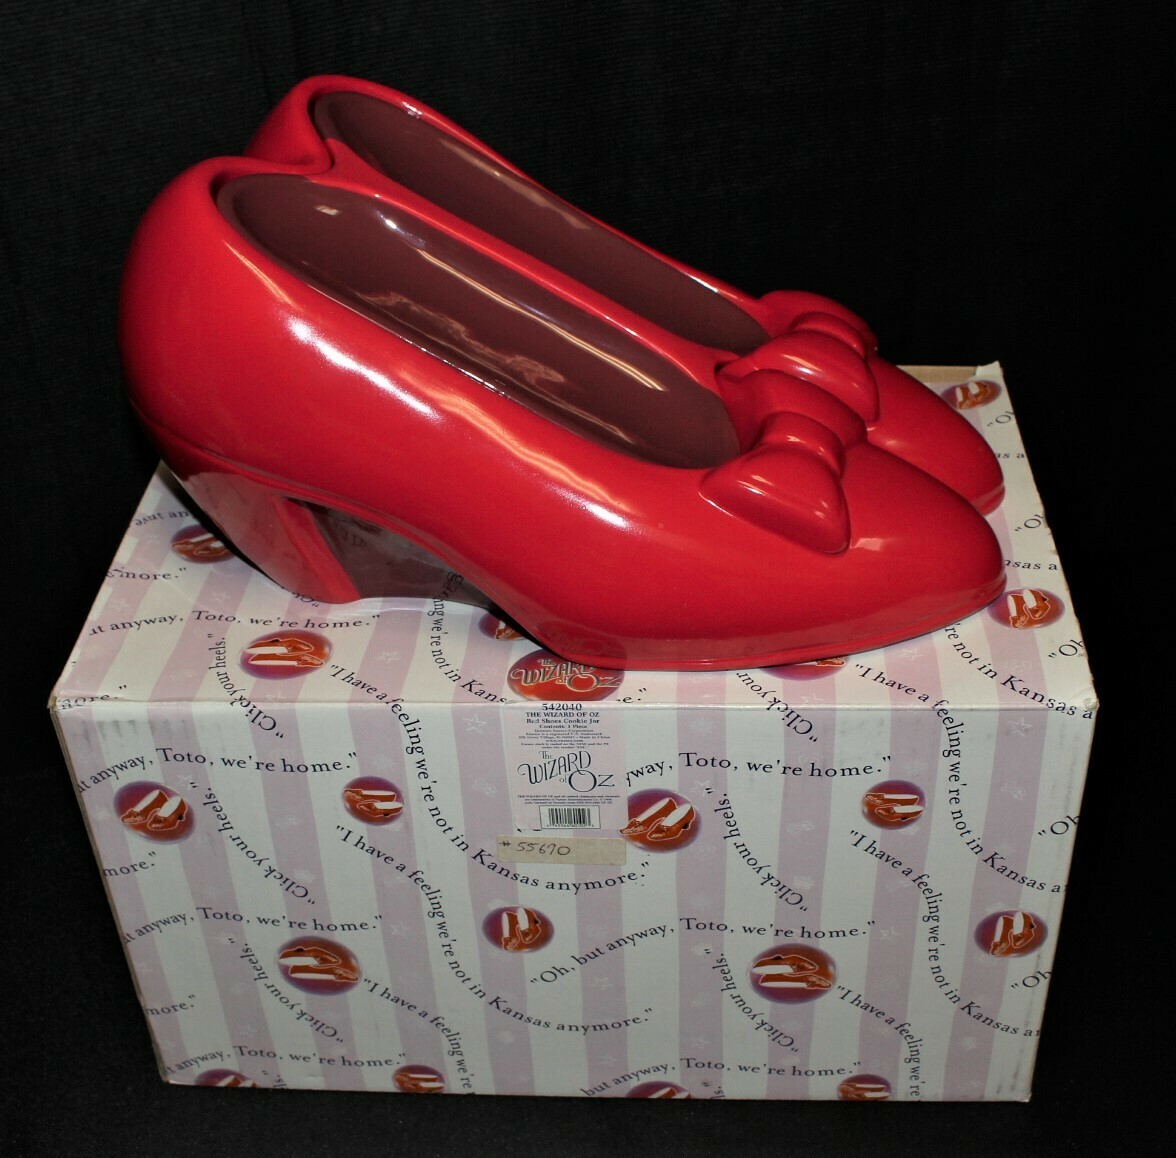 The Wizard of Oz Dorothy’s Red Slipper Shoes Cookie Jar by Enesco, Original Box